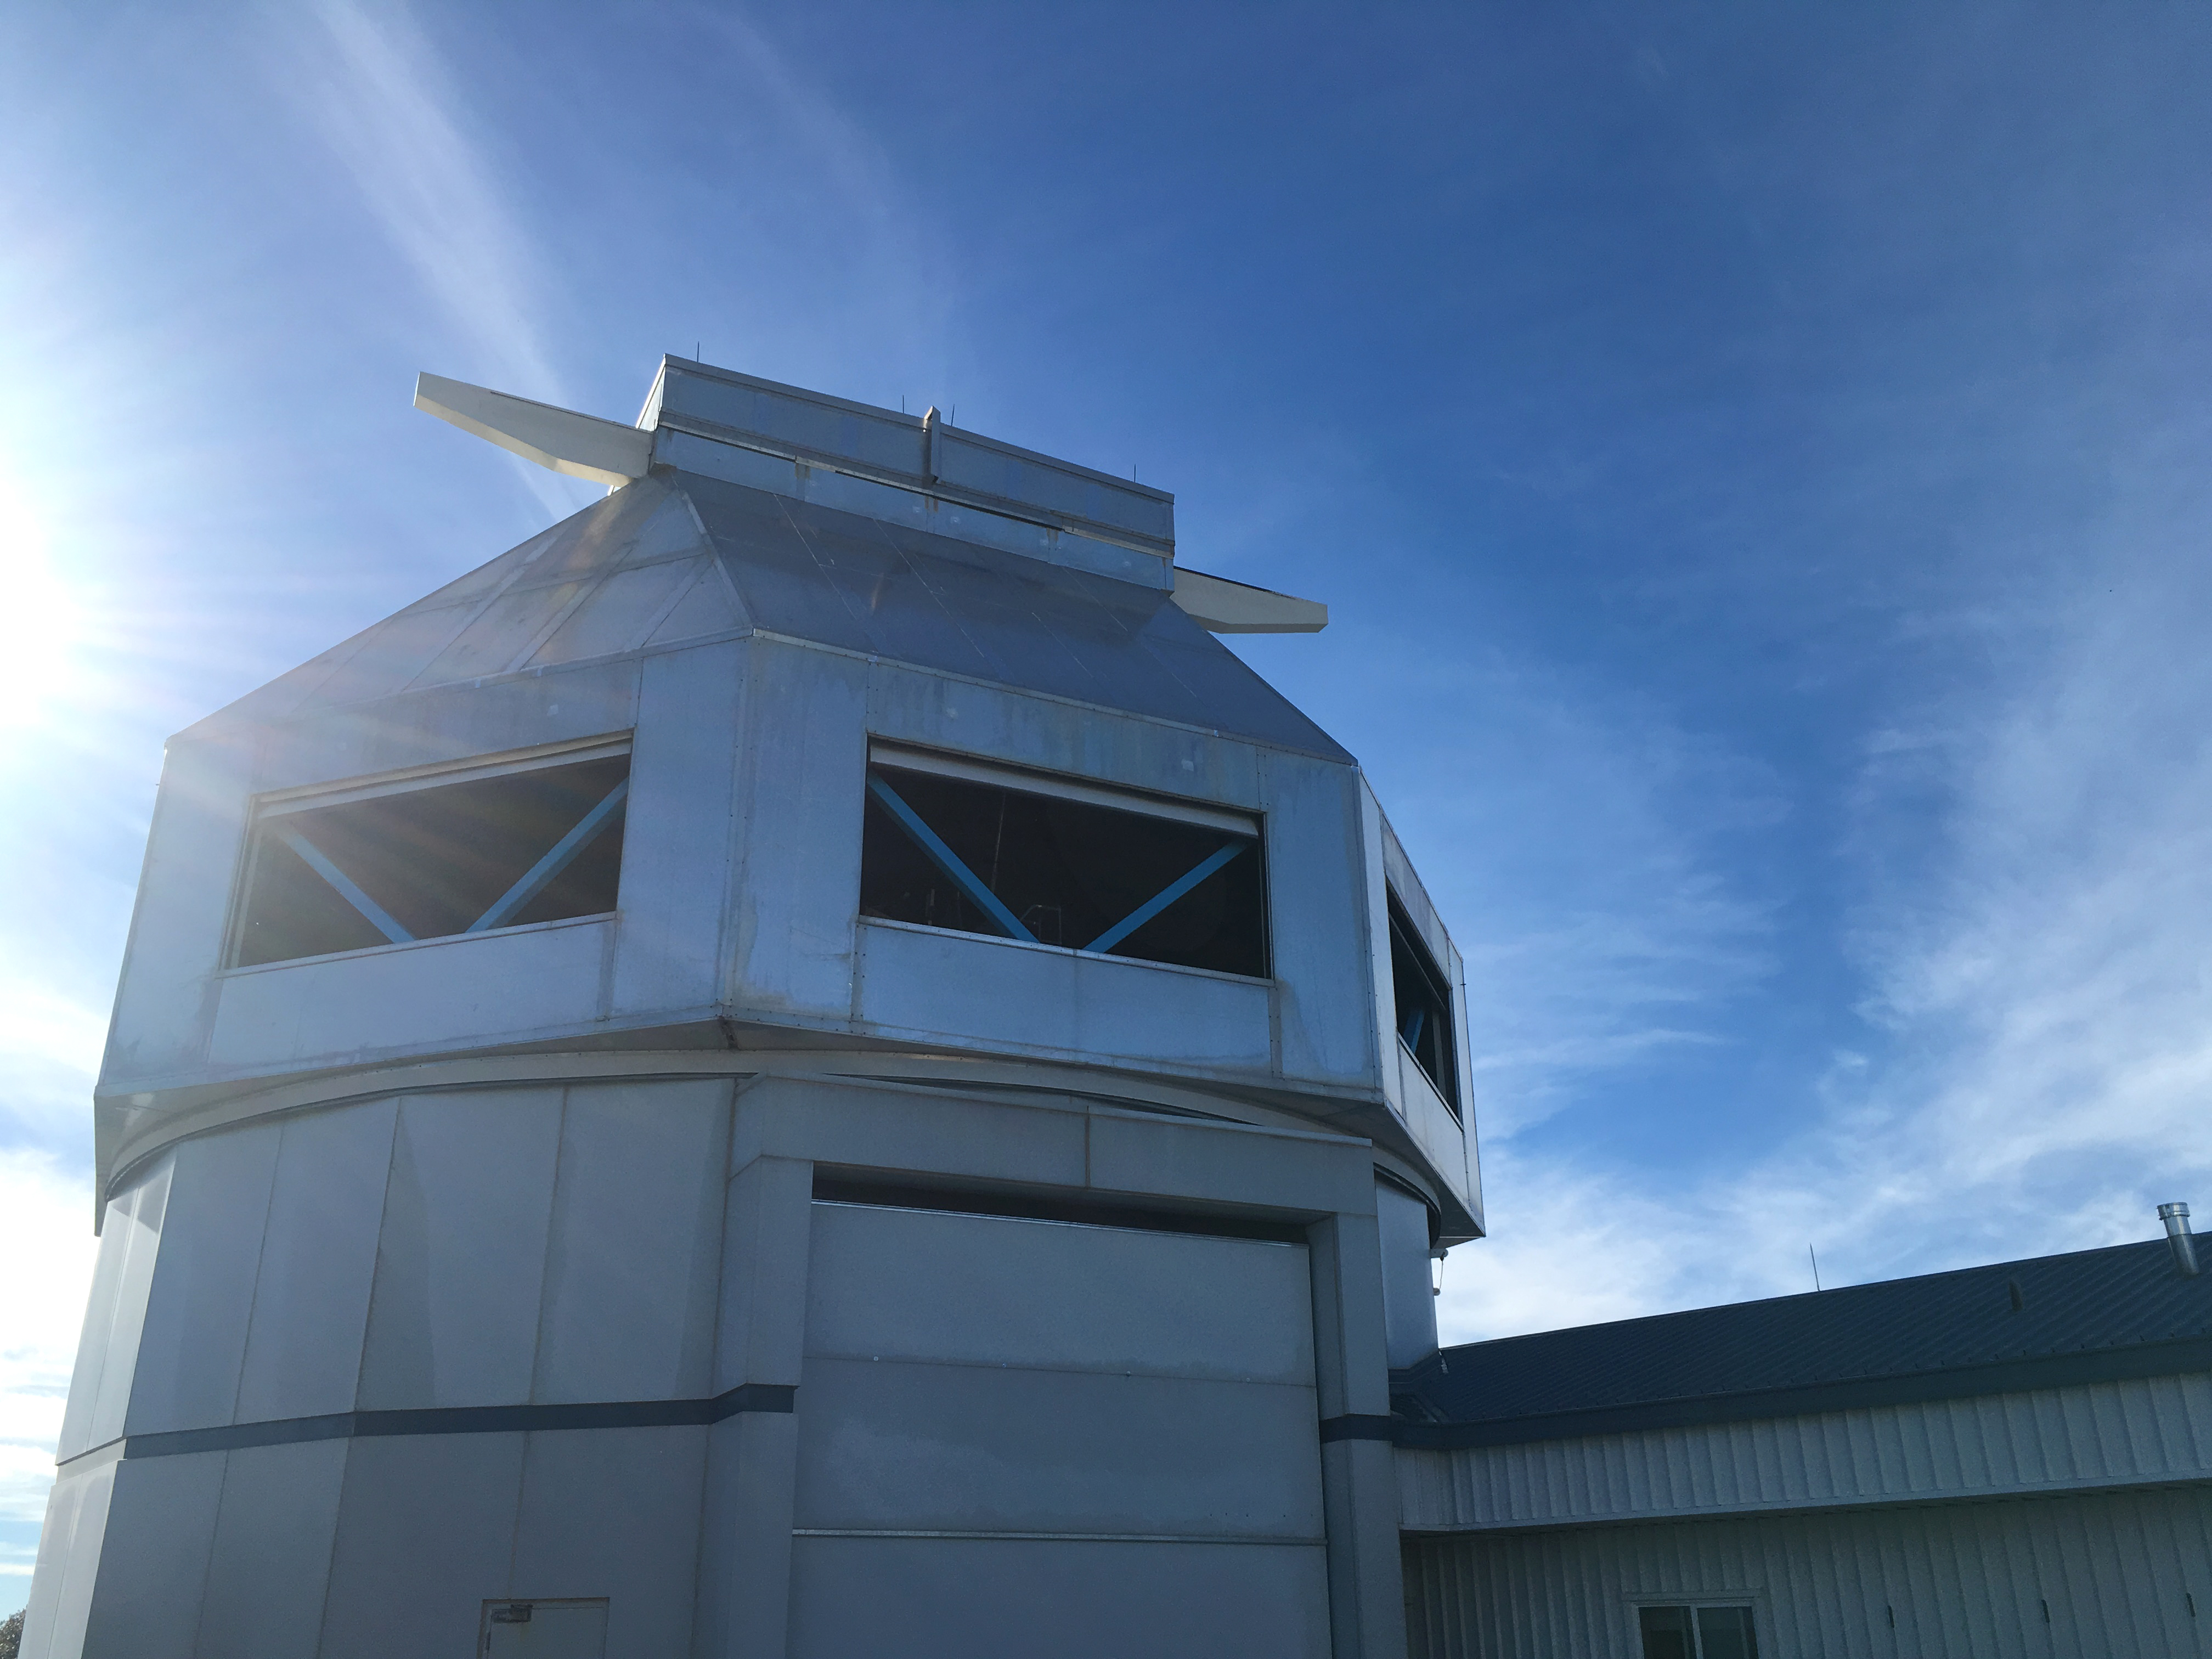 Looking up at a large silver building, vaguely octagonal in shape, that contains the WIYN telescope. There is a blue sky behind it.